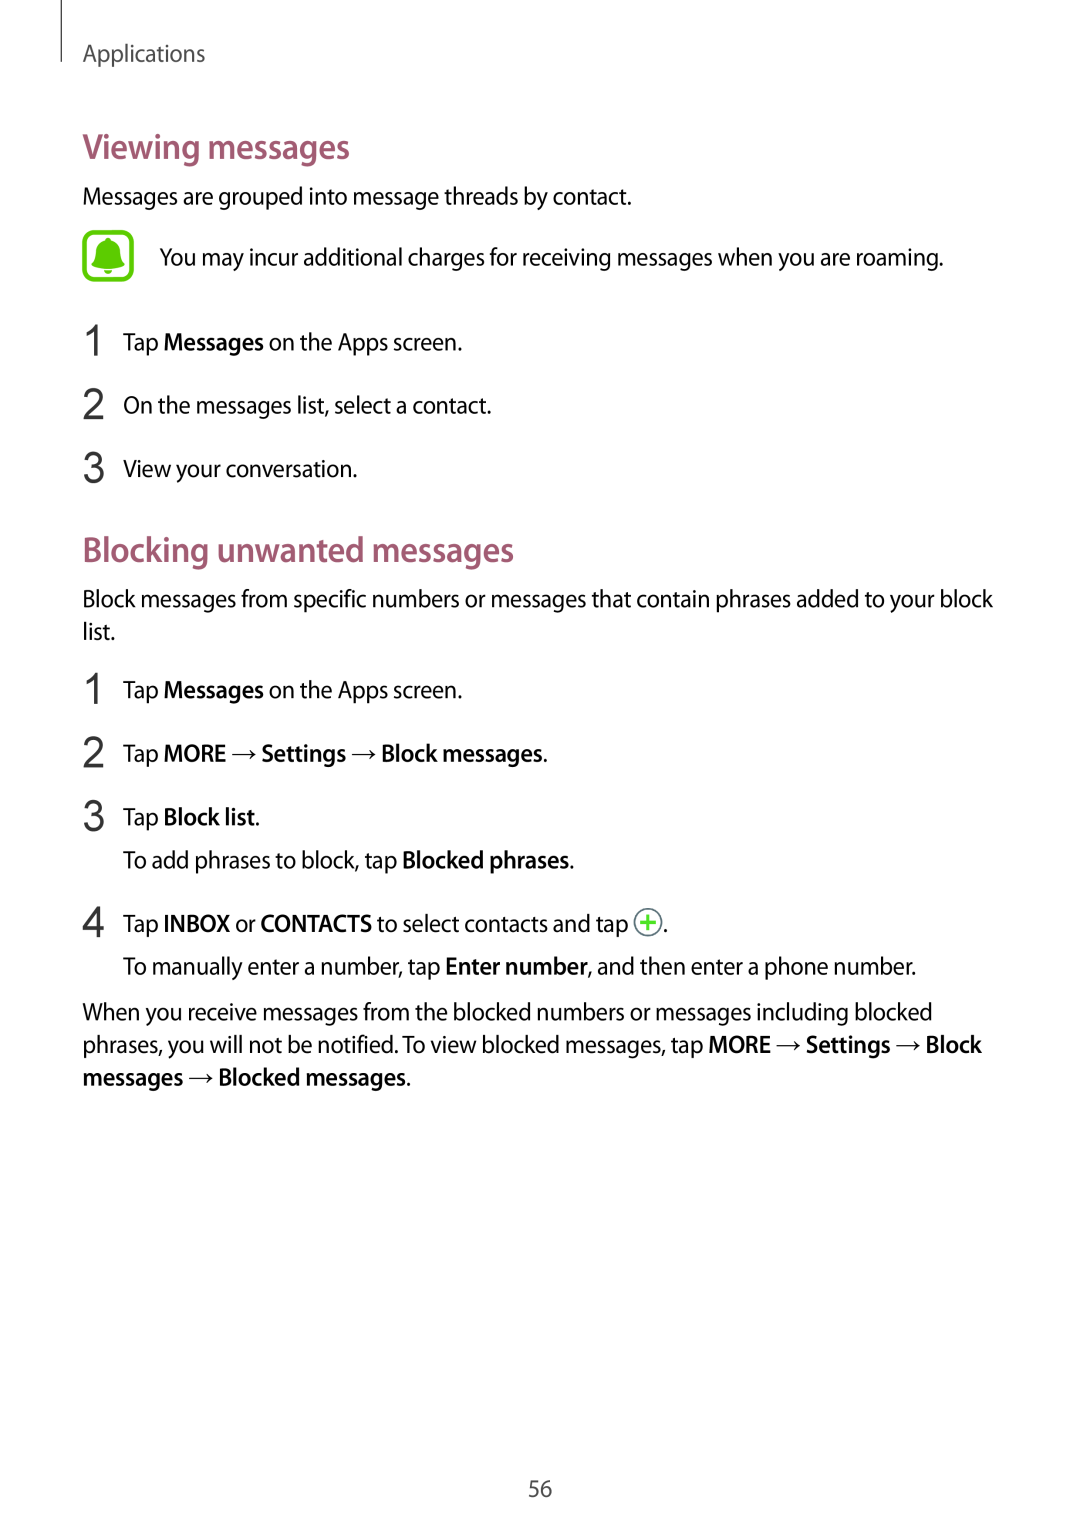 Samsung SM-T719NZDEITV Viewing messages, Blocking unwanted messages, Tap MORE →Settings →Block messages Tap Block list 